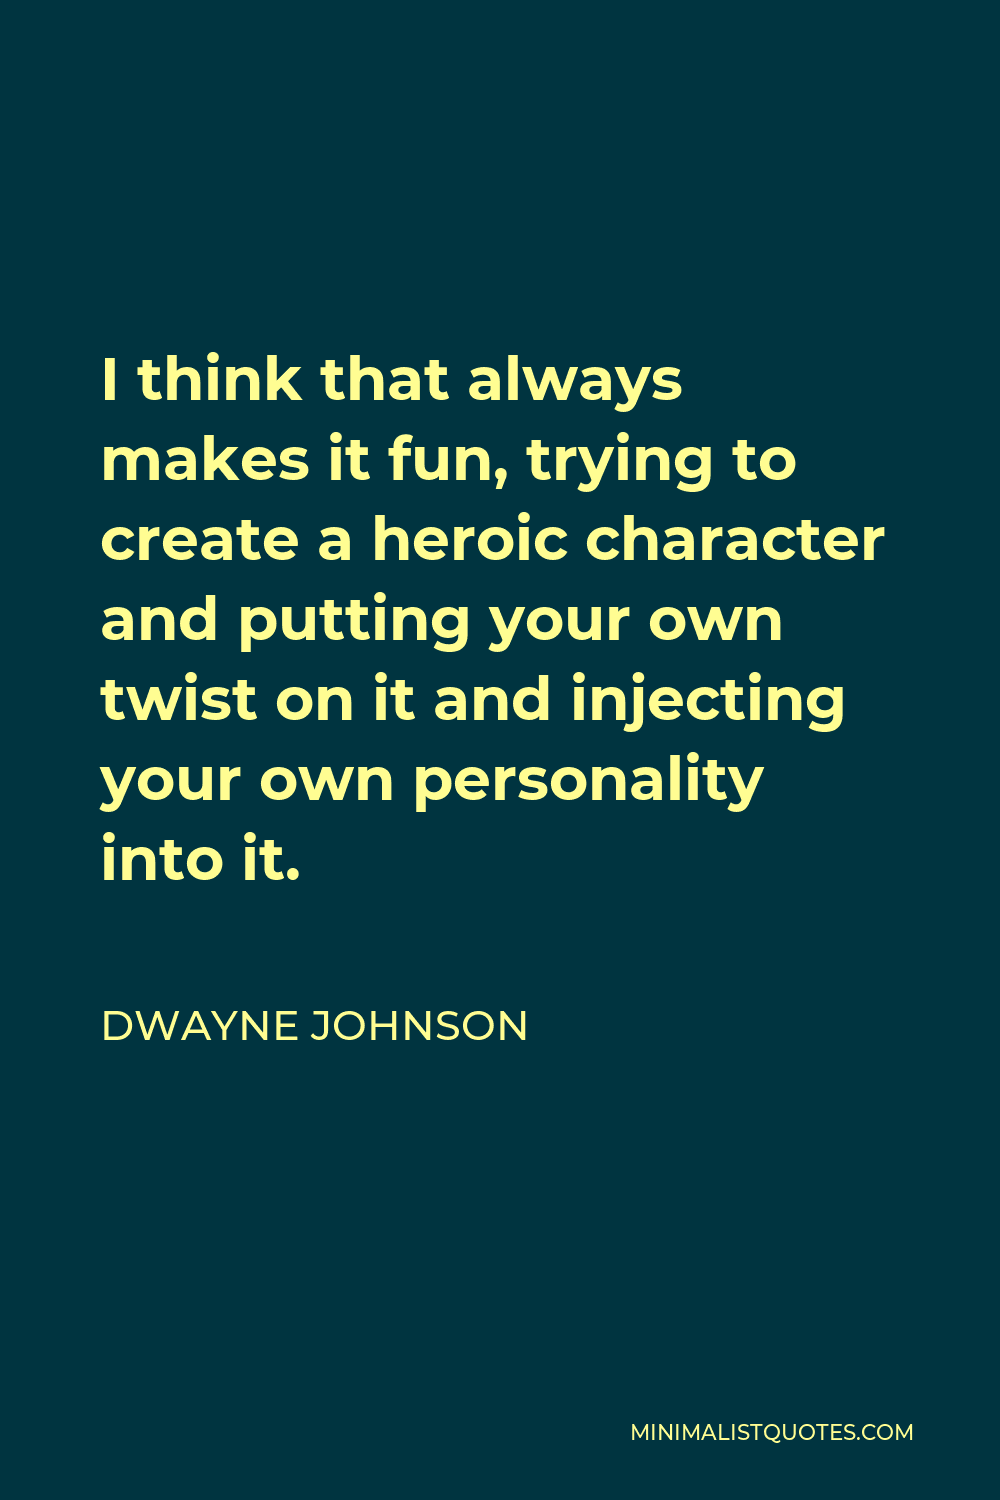 Dwayne Johnson Quote - I think that always makes it fun, trying to create a heroic character and putting your own twist on it and injecting your own personality into it.